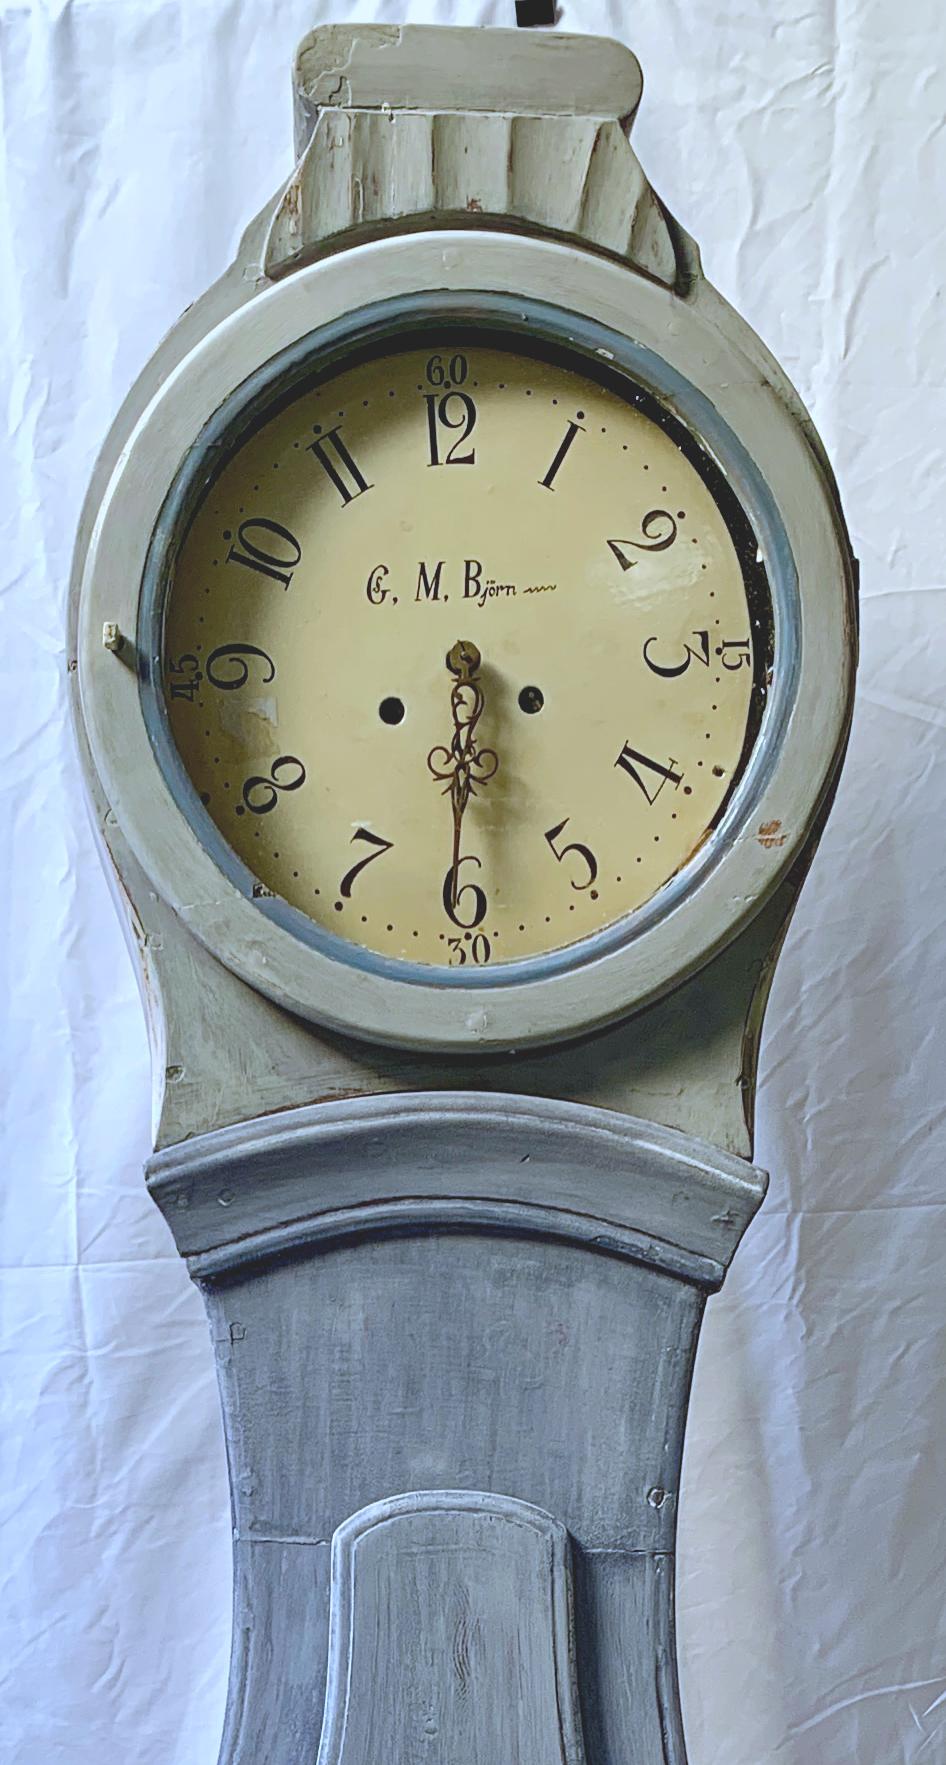 Antique Swedish mora clock from the 1800s in lovely later blue finish with a classic shape body and a good face with makers name C M Bjorn in good condition. Measures: 197 cm.

It has the Classic extended belly of a traditional Swedish mora clock